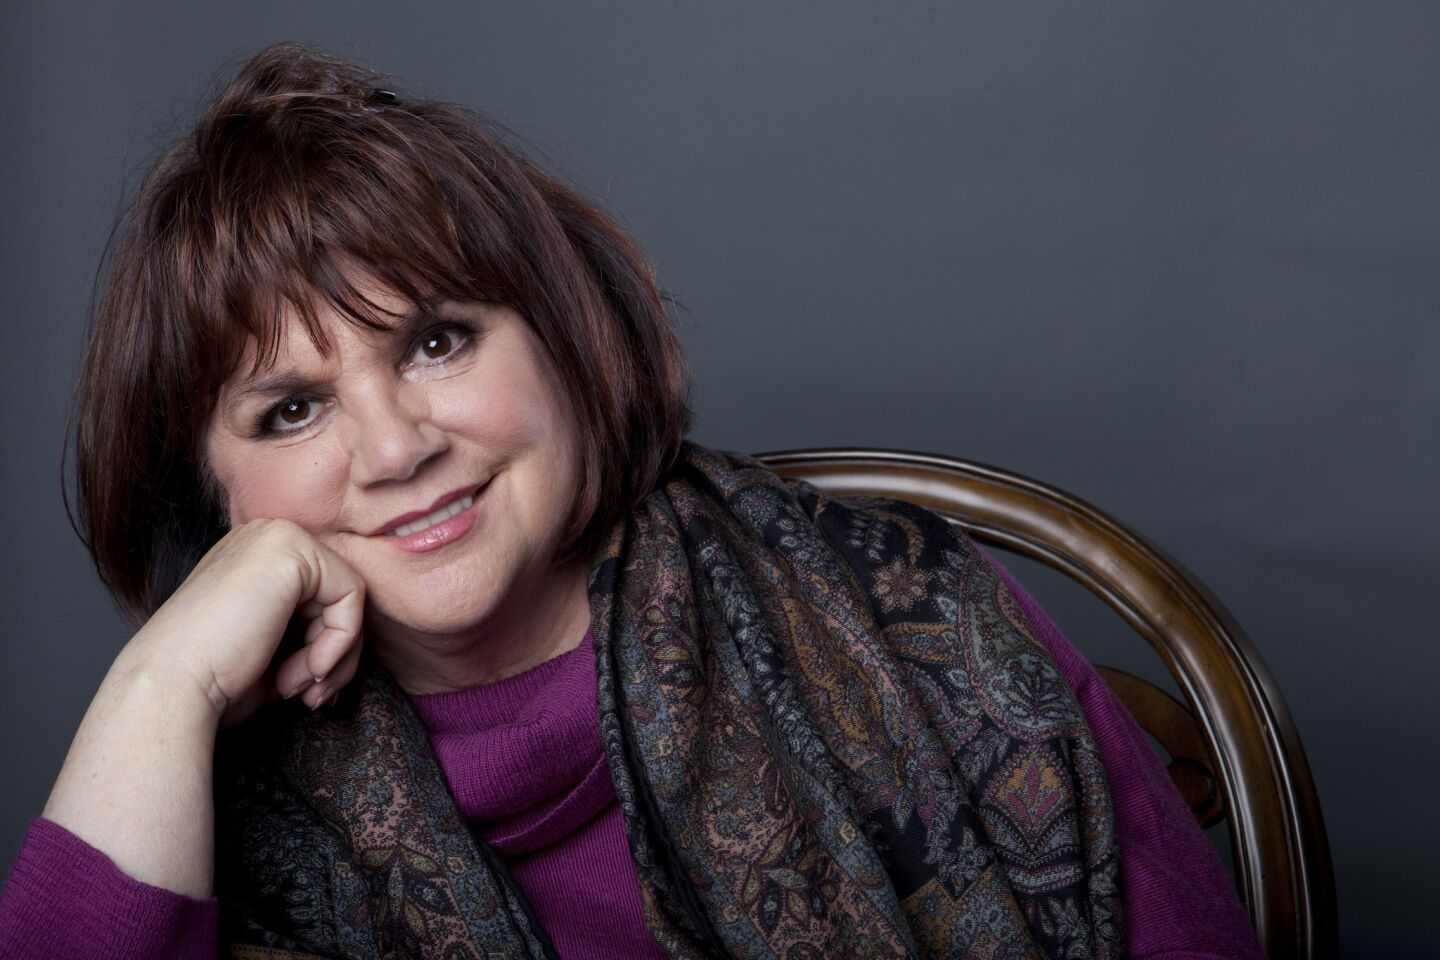 Ronstadt revealed to AARP Magazine in August 2013 that she could no longer sing after being diagnosed with Parkinson's disease. "No one can sing with Parkinson's disease," she said. "No matter how hard you try." Ronstadt most recently released "Simple Dreams," a memoir that documents her career, family and her past romantic relationship with Gov. Jerry Brown.